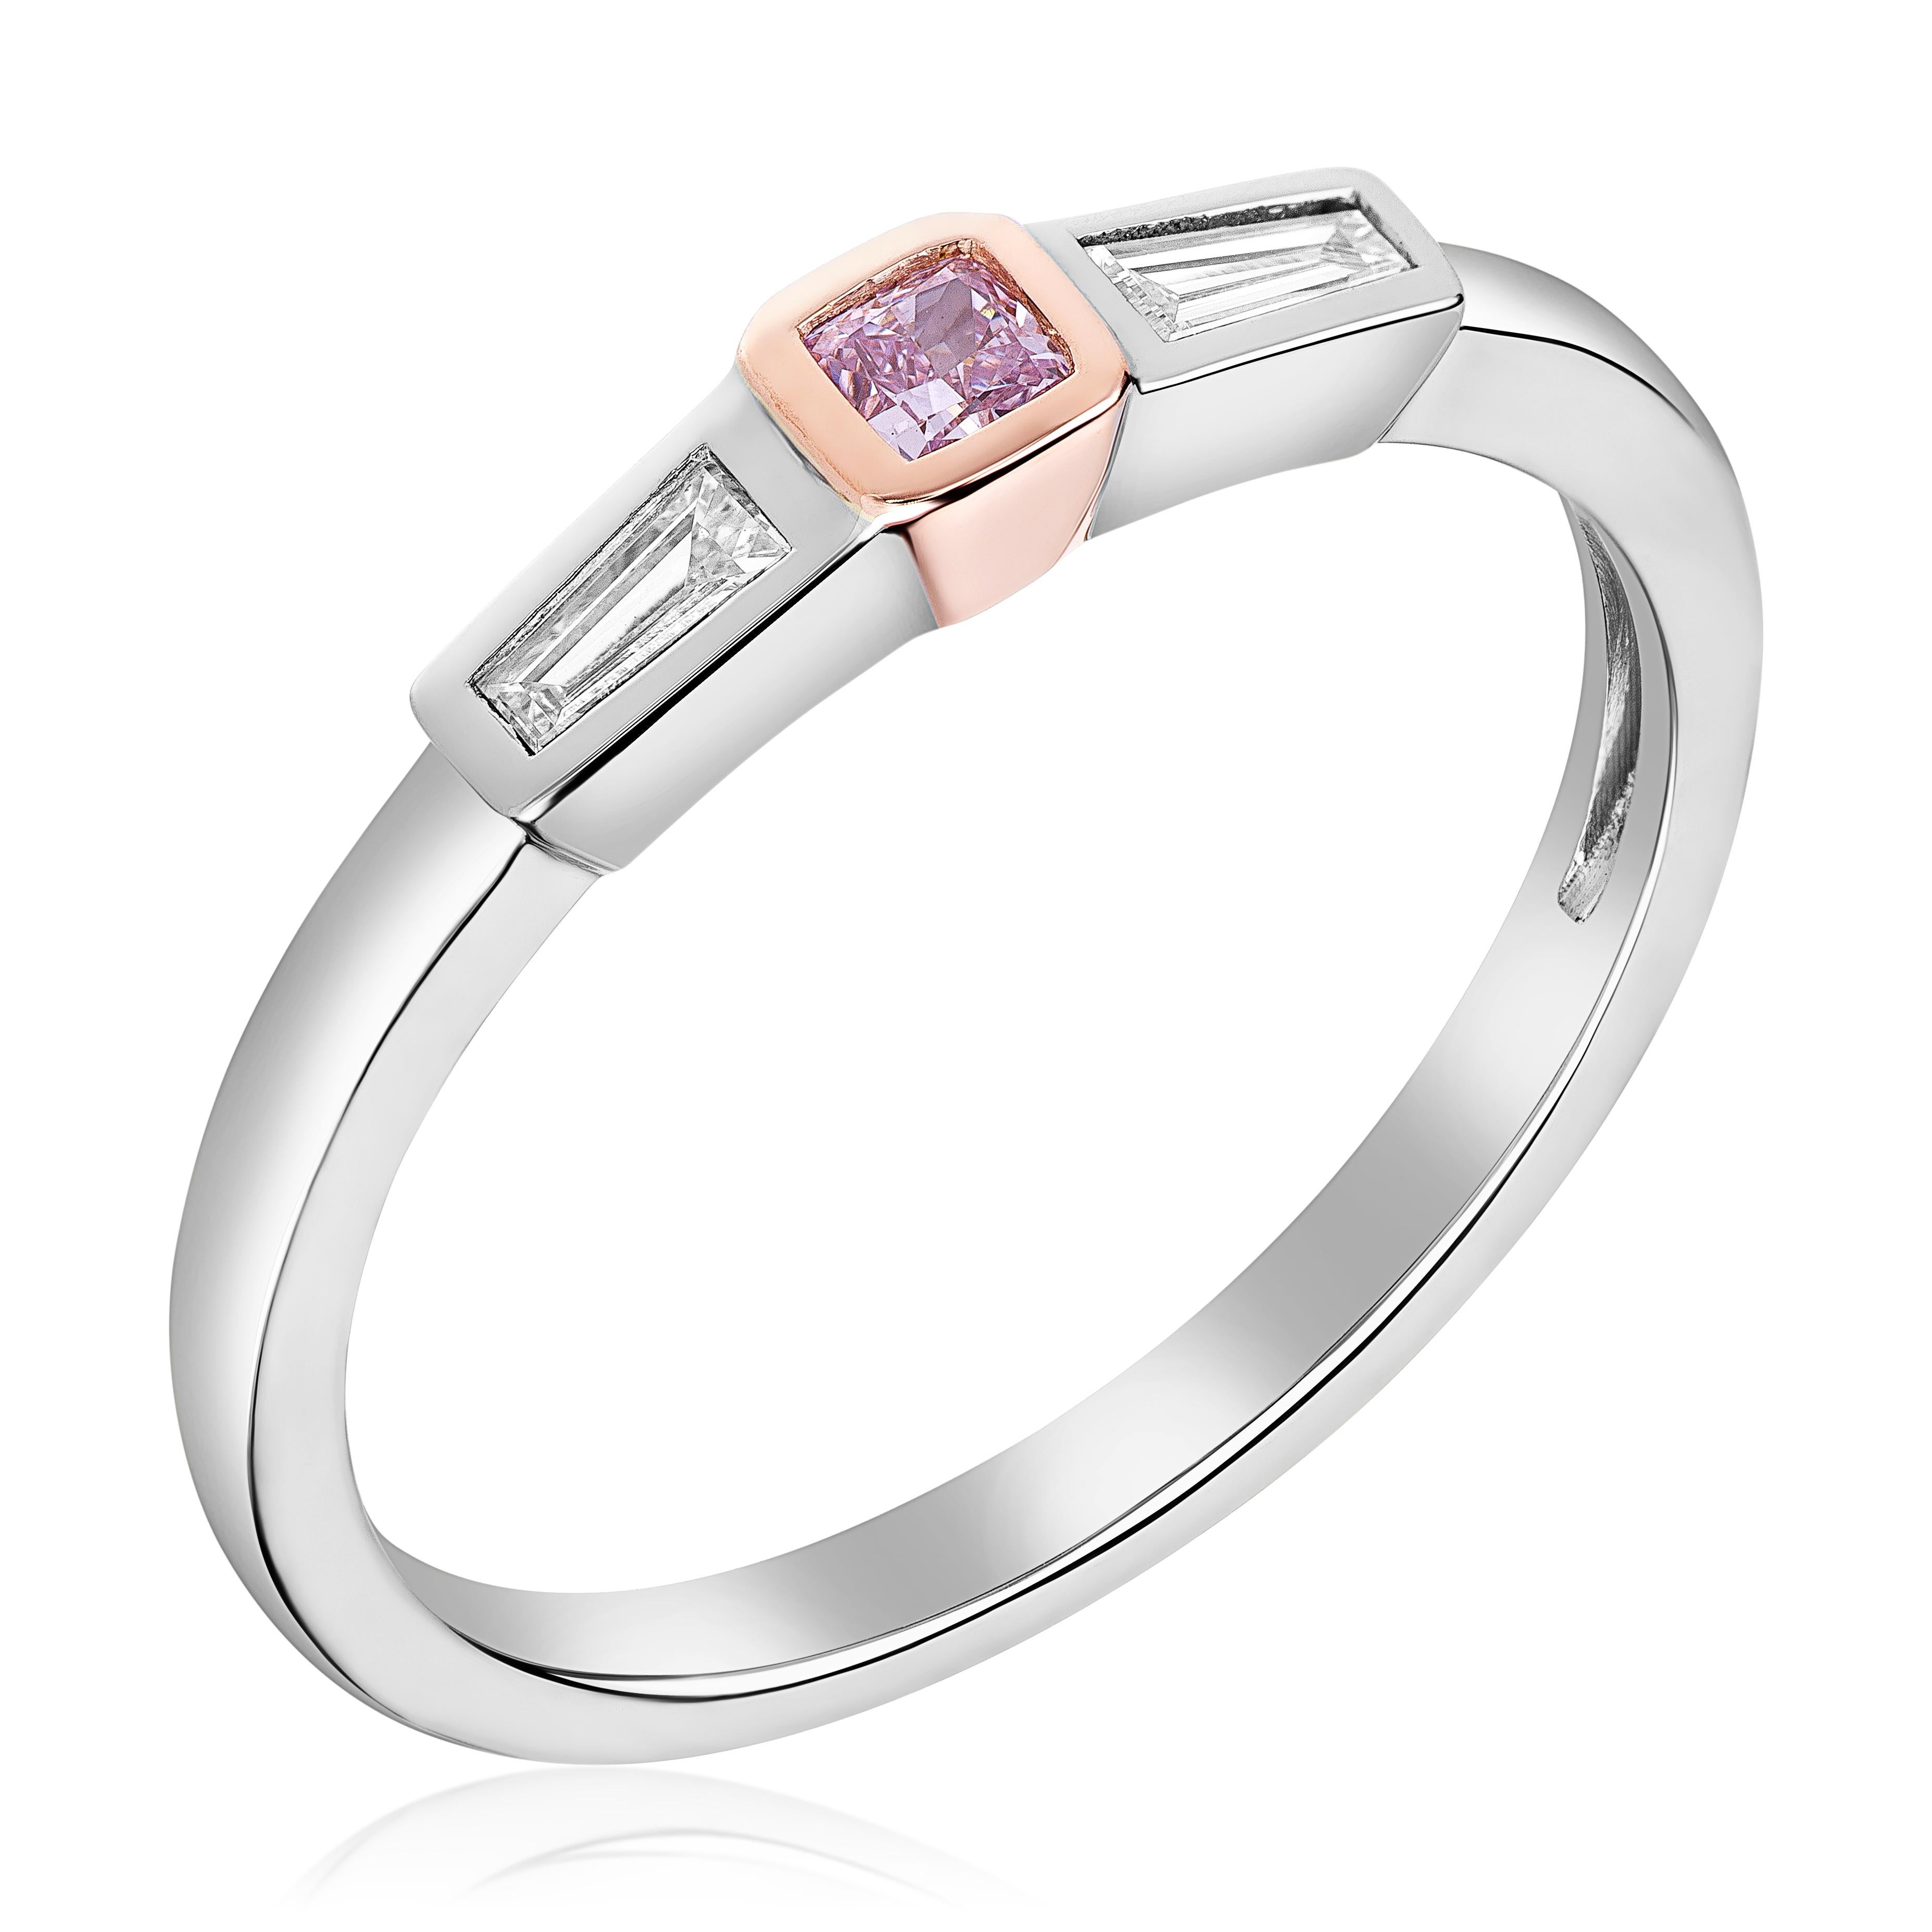 Introducing a captivating stackable band that will elevate your style with its unique design. This exquisite ring features a 0.08-carat fancy pink cushion-cut diamond, radiating with a soft and romantic hue. The diamond is beautifully enhanced by